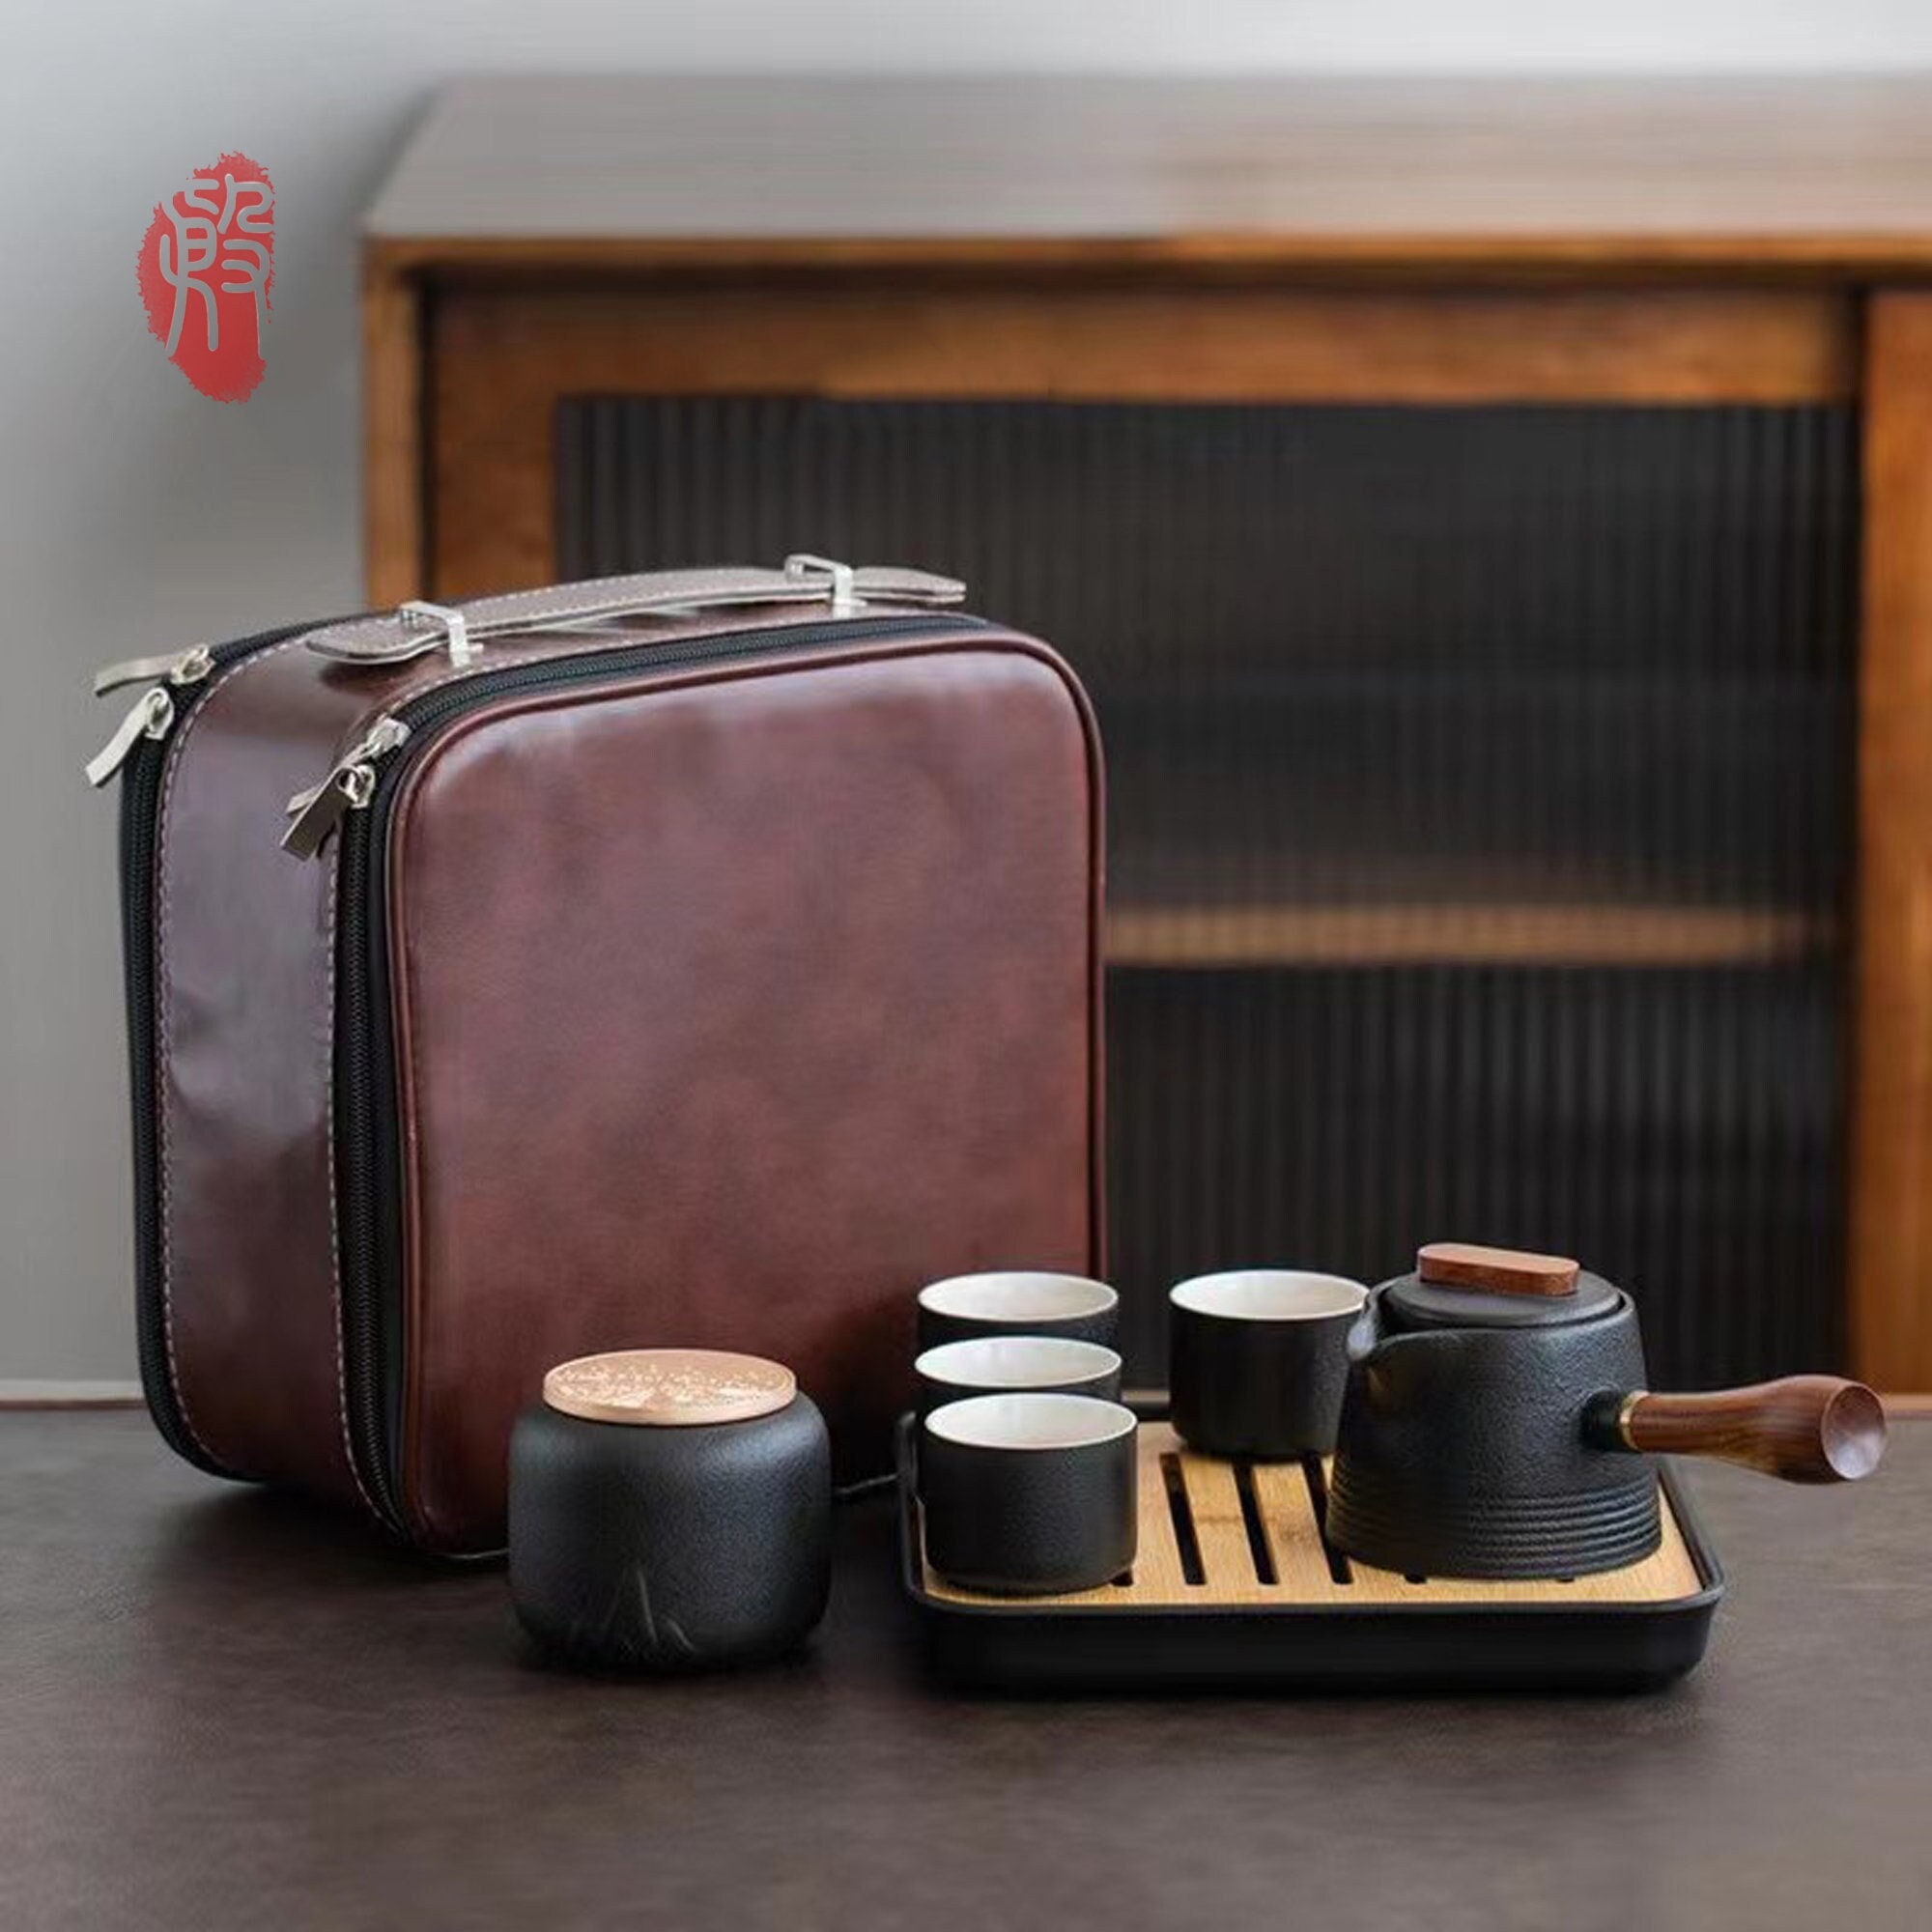 Chinese Tea Set, Kungfu Tea Pot Cup Set With 4X Tea Cups, Bamboo Tea Tray,  Tea Canister, Infuser, Travel Portable Tea Set Suitable For Office, Picnic